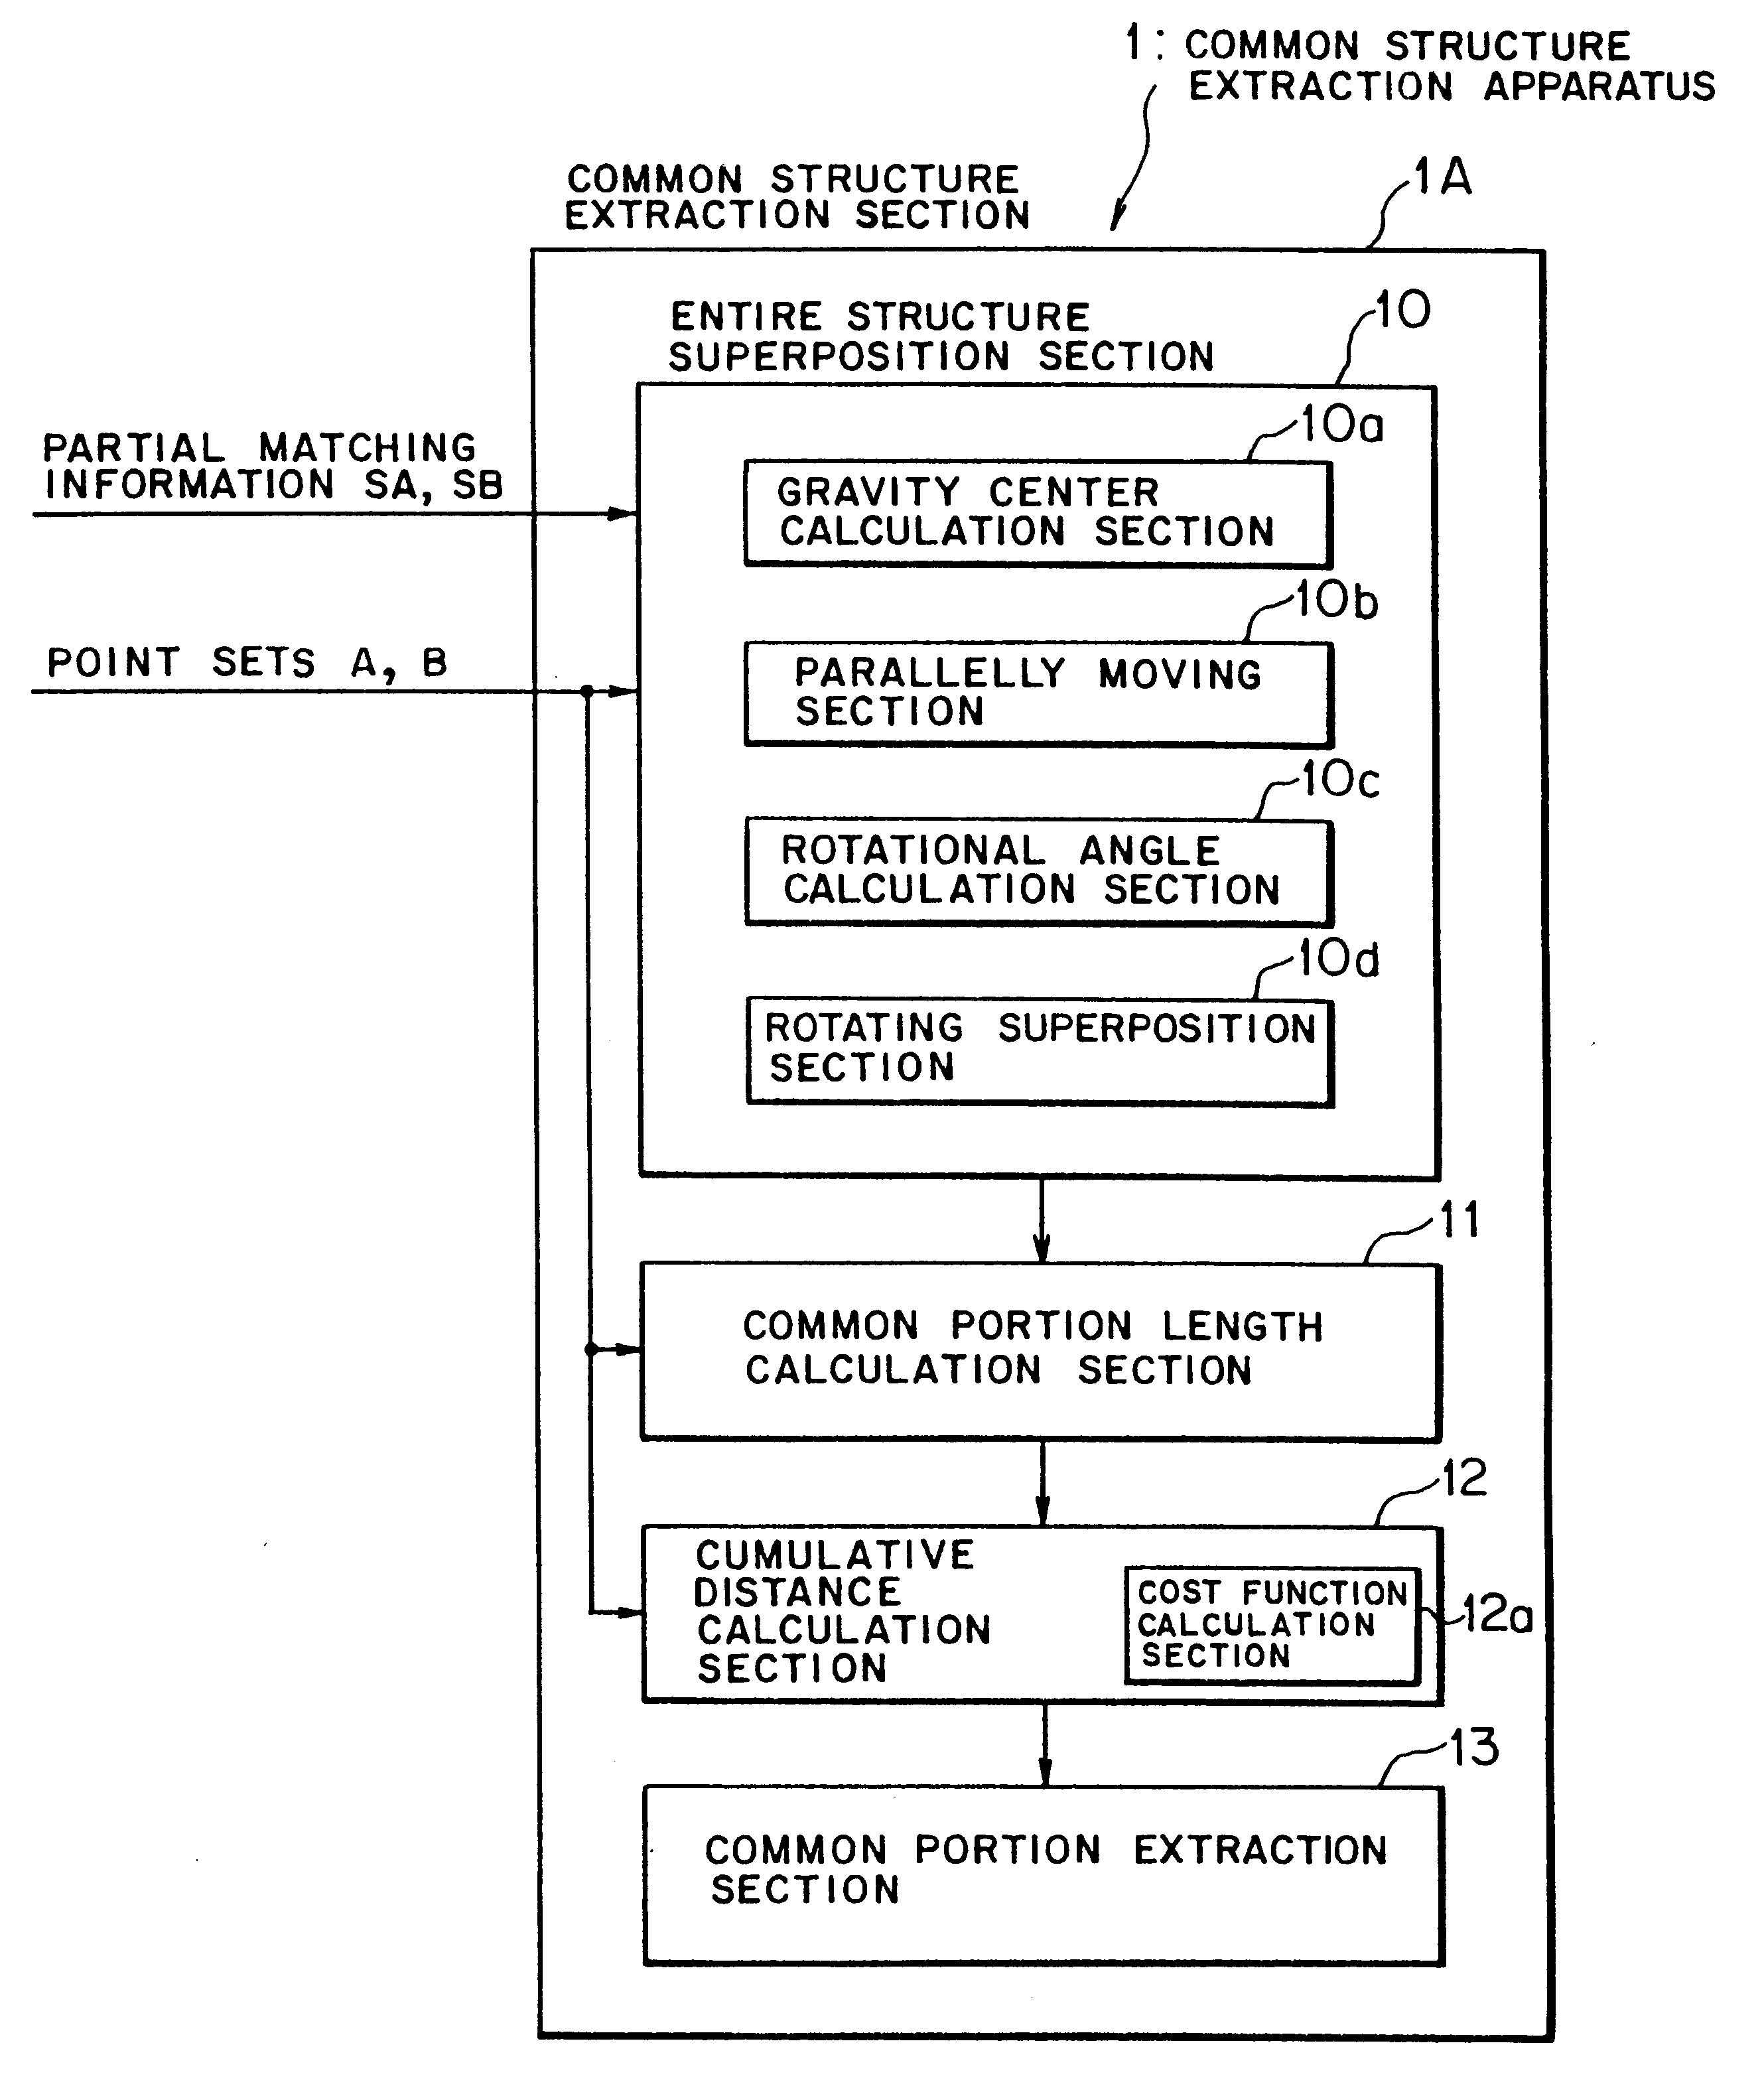 Common structure extraction apparatus